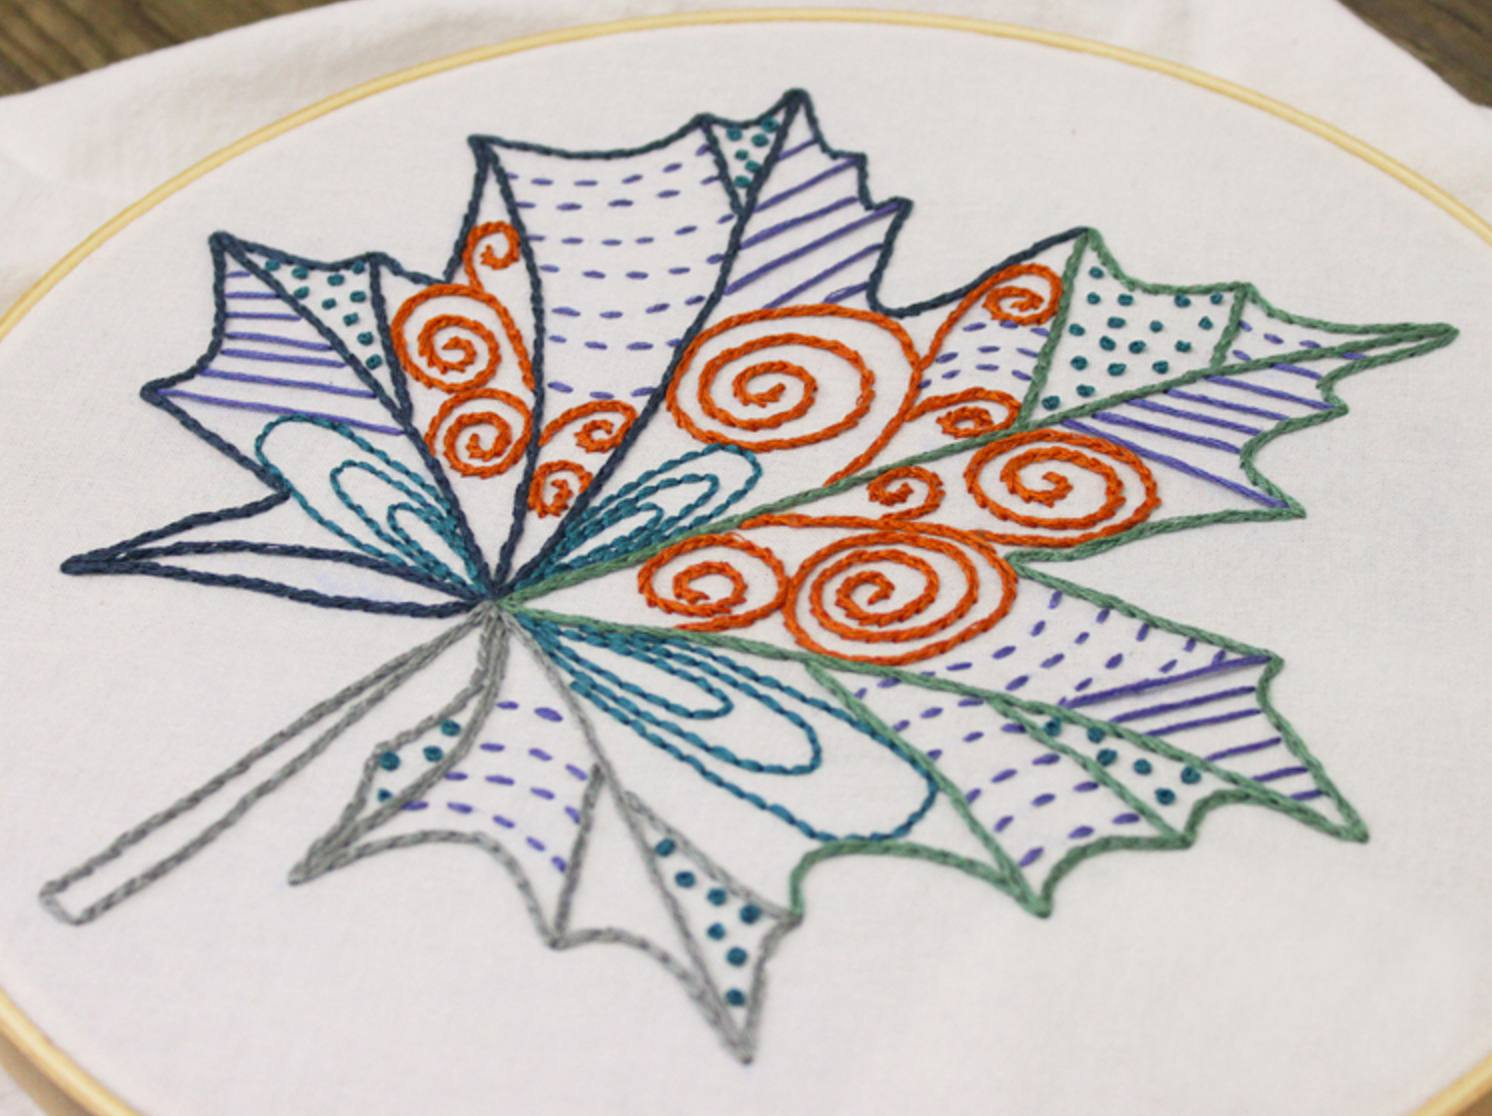 How To Design Embroidery Patterns By Hand 10 Hand Embroidery Patterns For Autumn Stitching